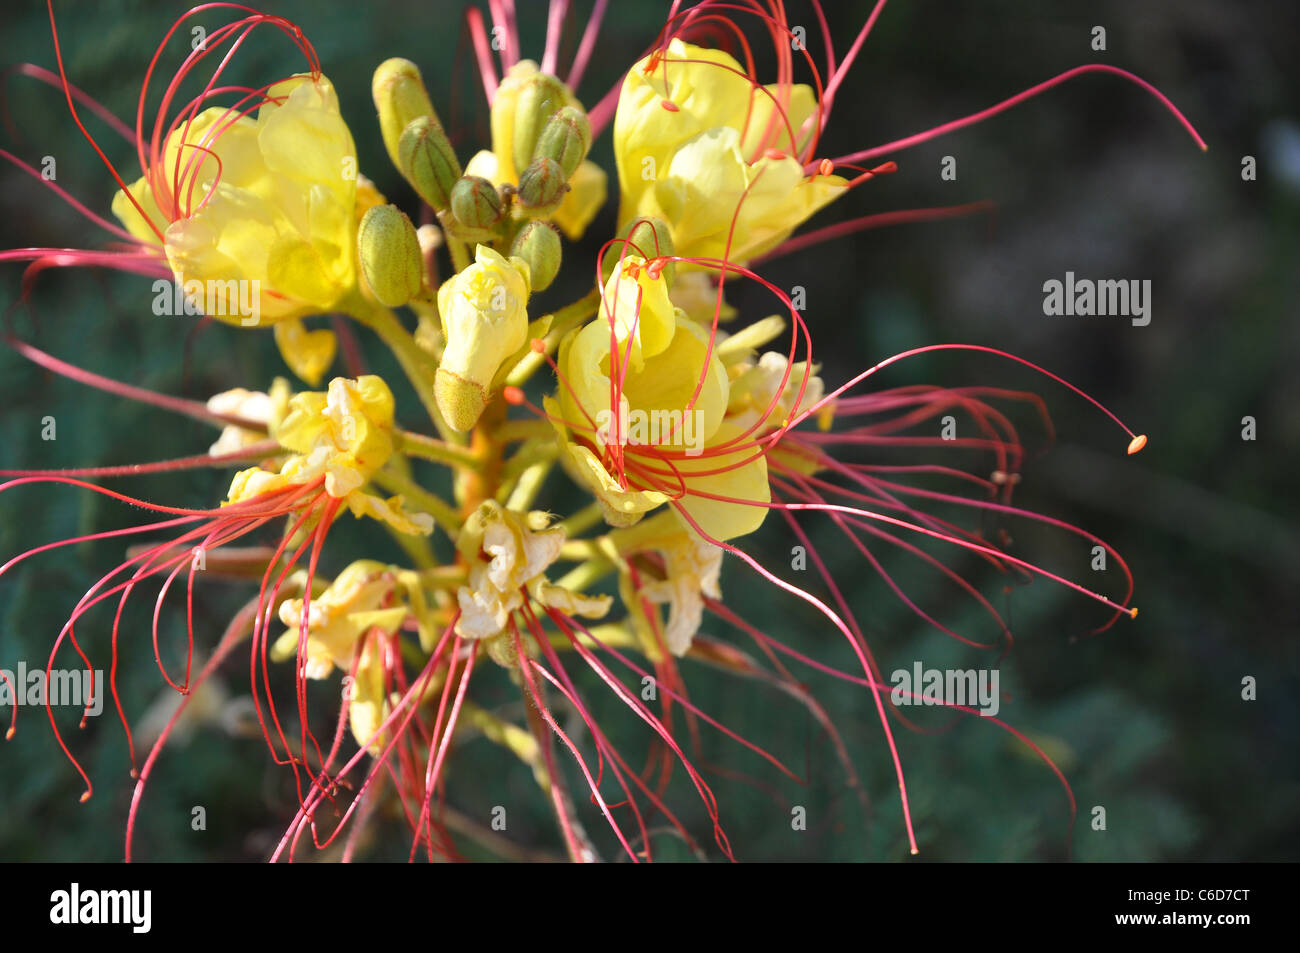 Yellow flower with long red filaments and small anthers Stock Photo